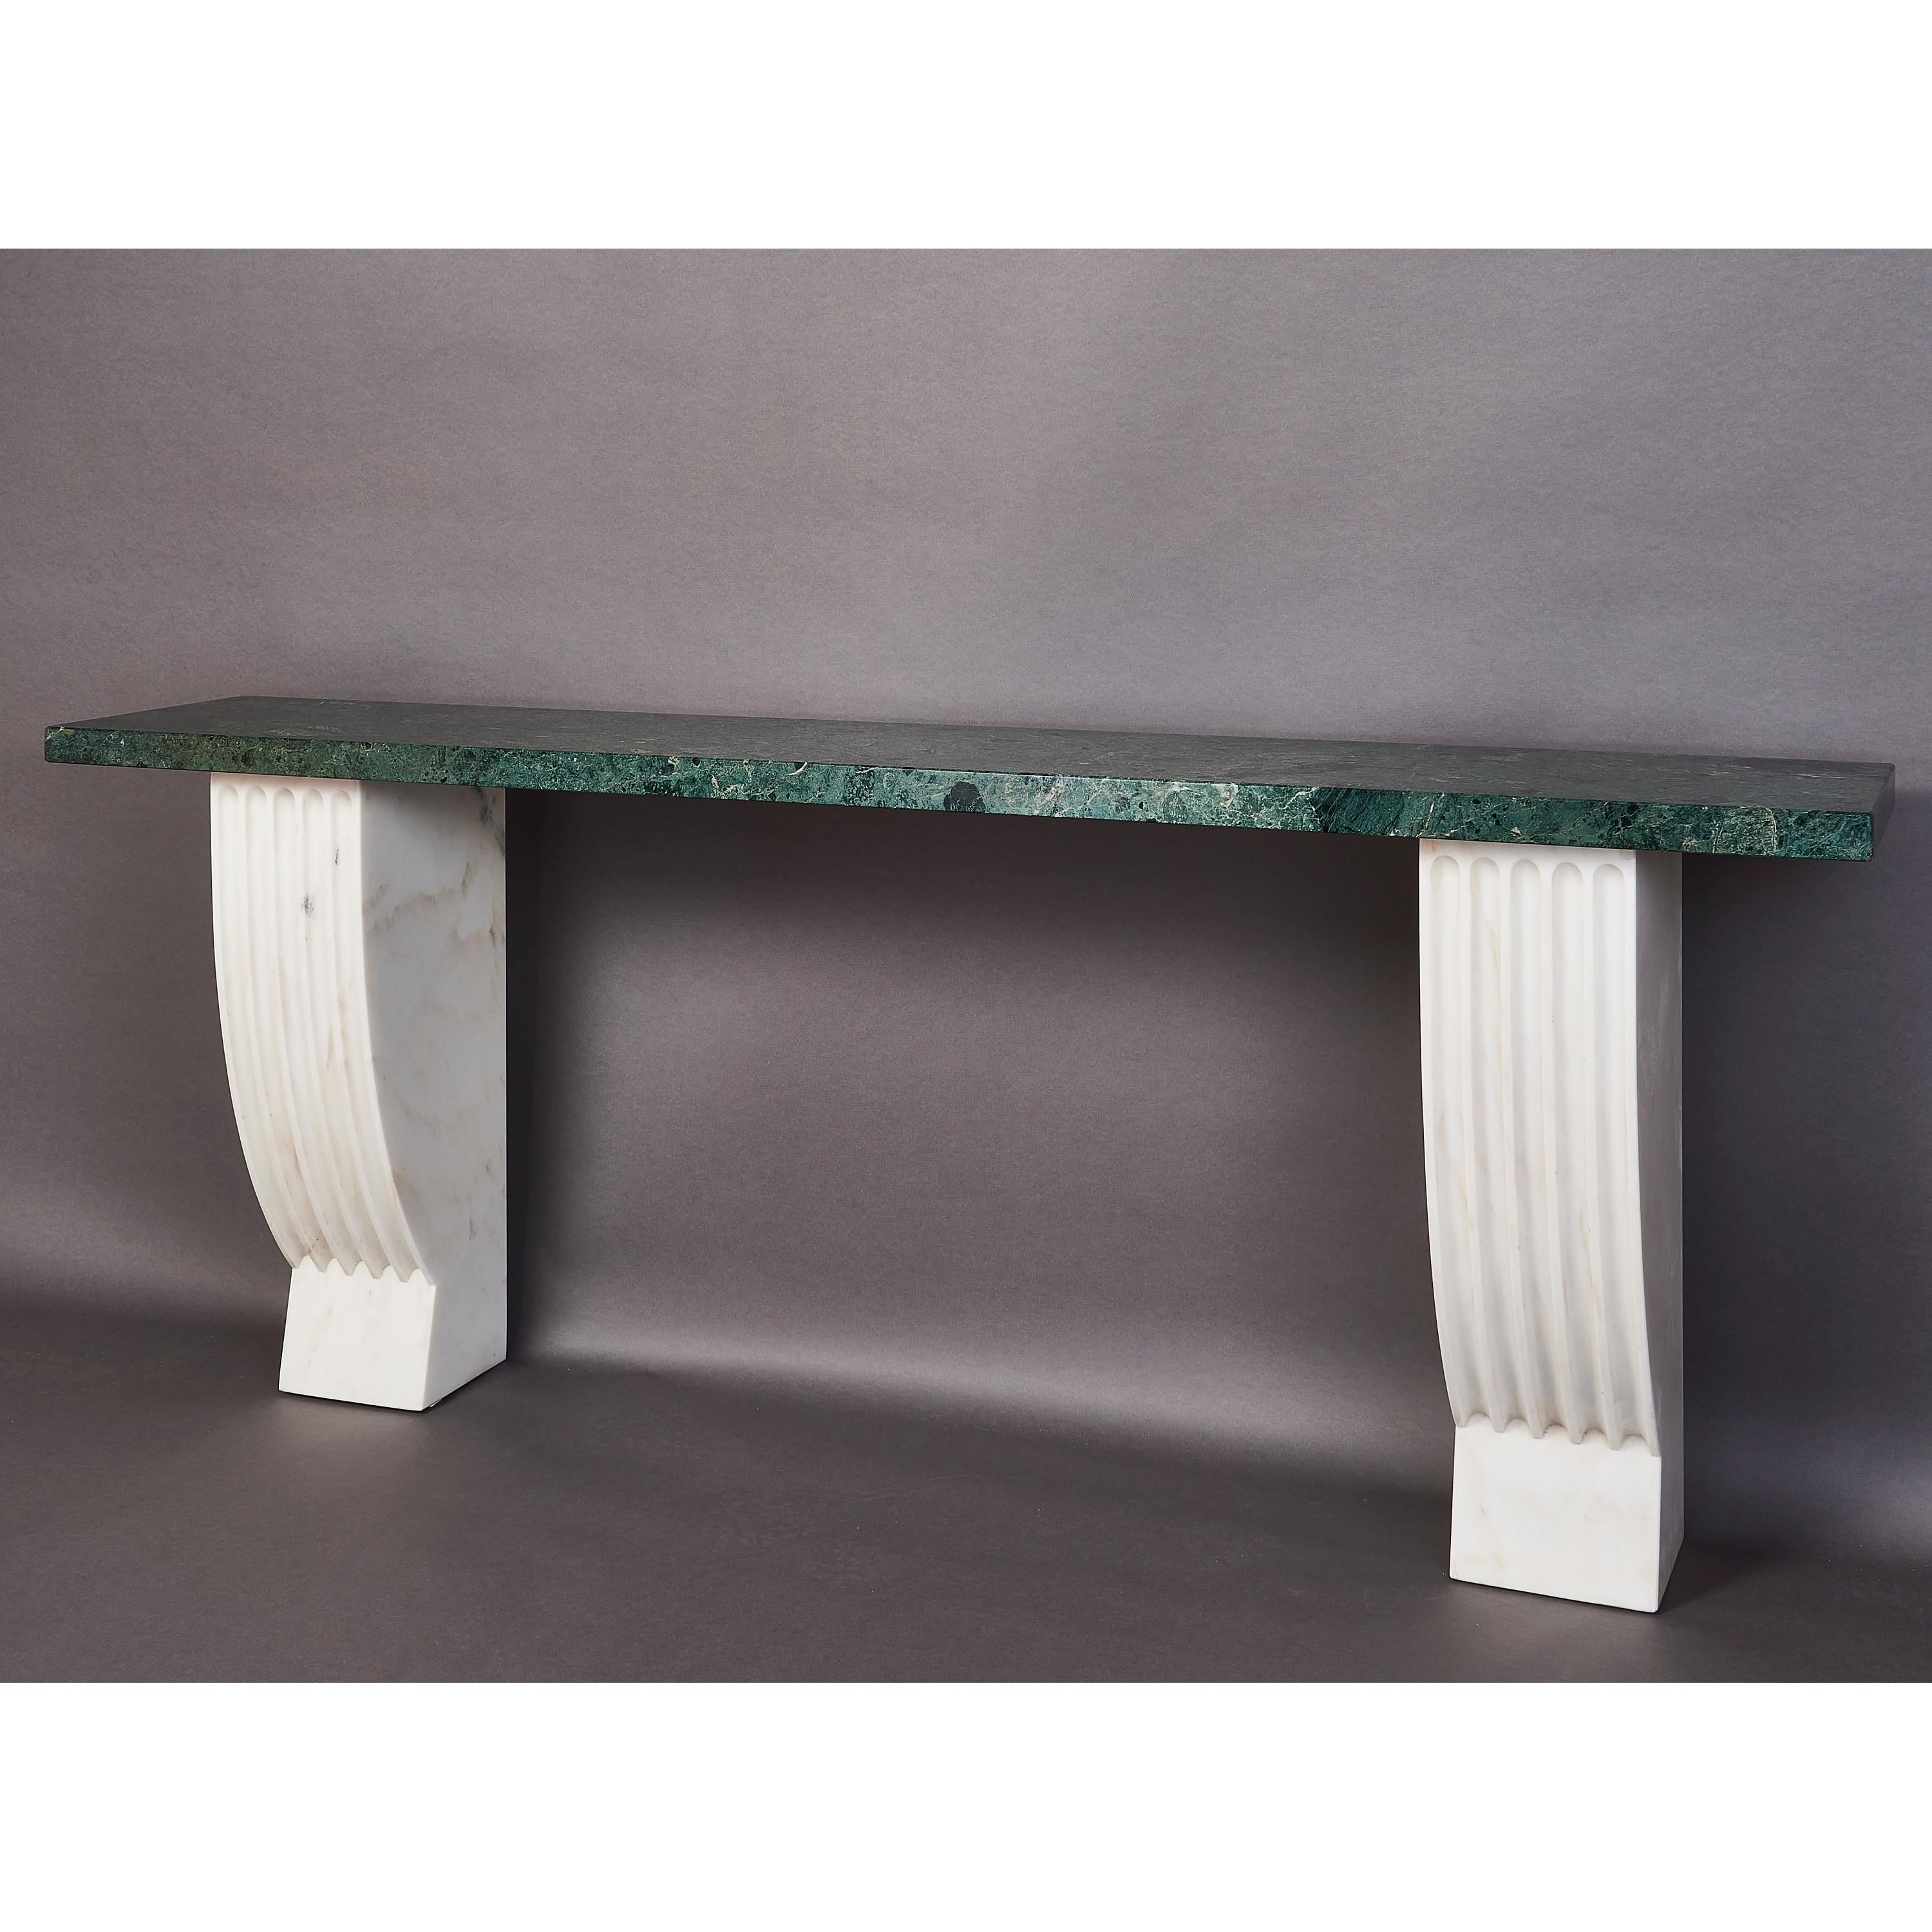 Italy, 1930's
An early Italian marble console
A magnificent example of Italian neoclassicism of the 20's and 30's, in the manner of Piero Portaluppi and Tomaso Buzzi, the Carrara marble deeply fluted, with richly figured Verde Alpi marble